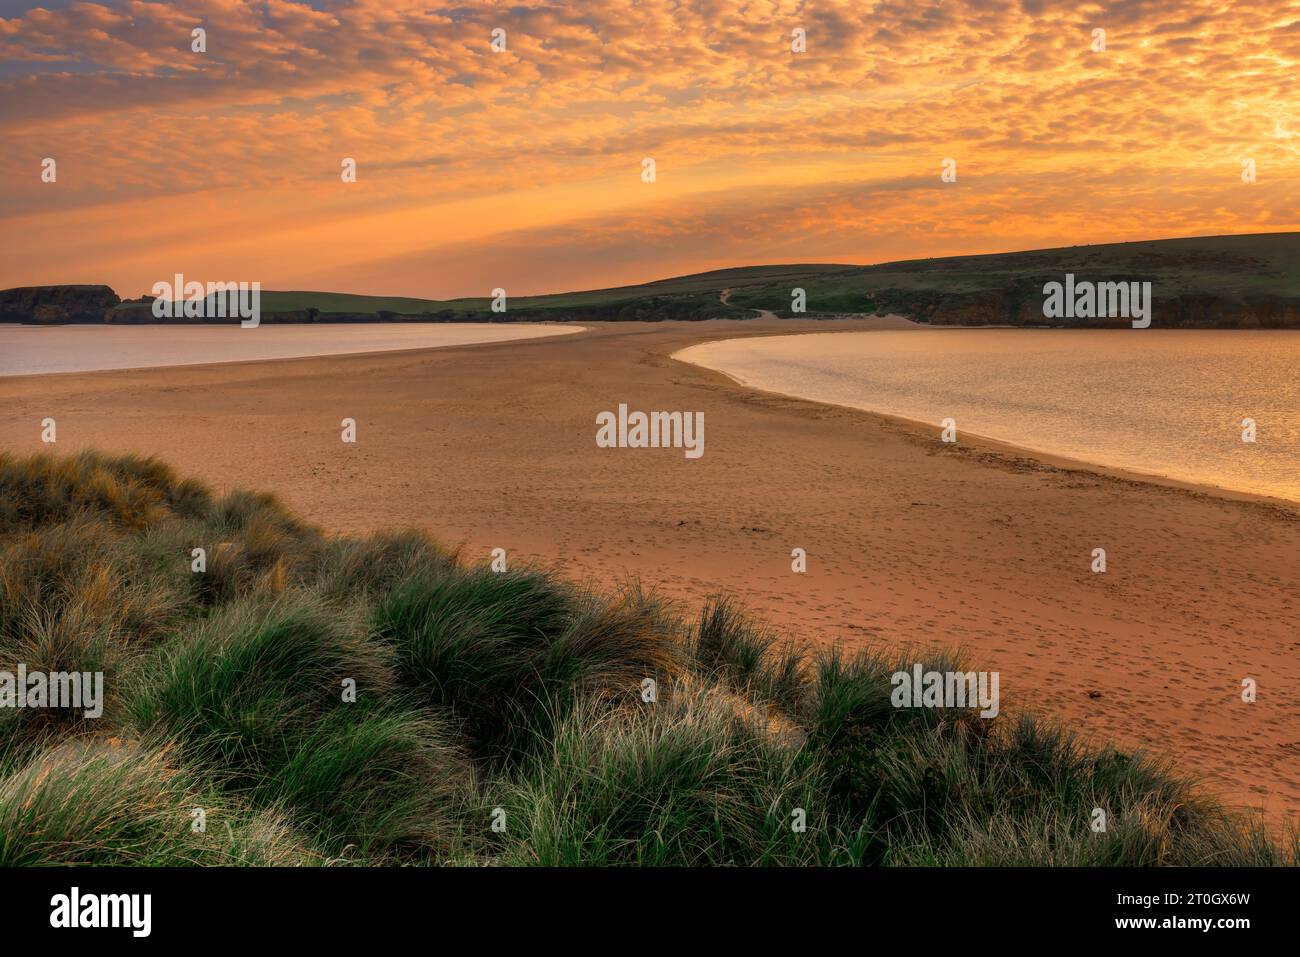 St Ninian's Beach is a large, natural sand causeway with sea on either side. It is located on the west coast of Shetland. Stock Photo